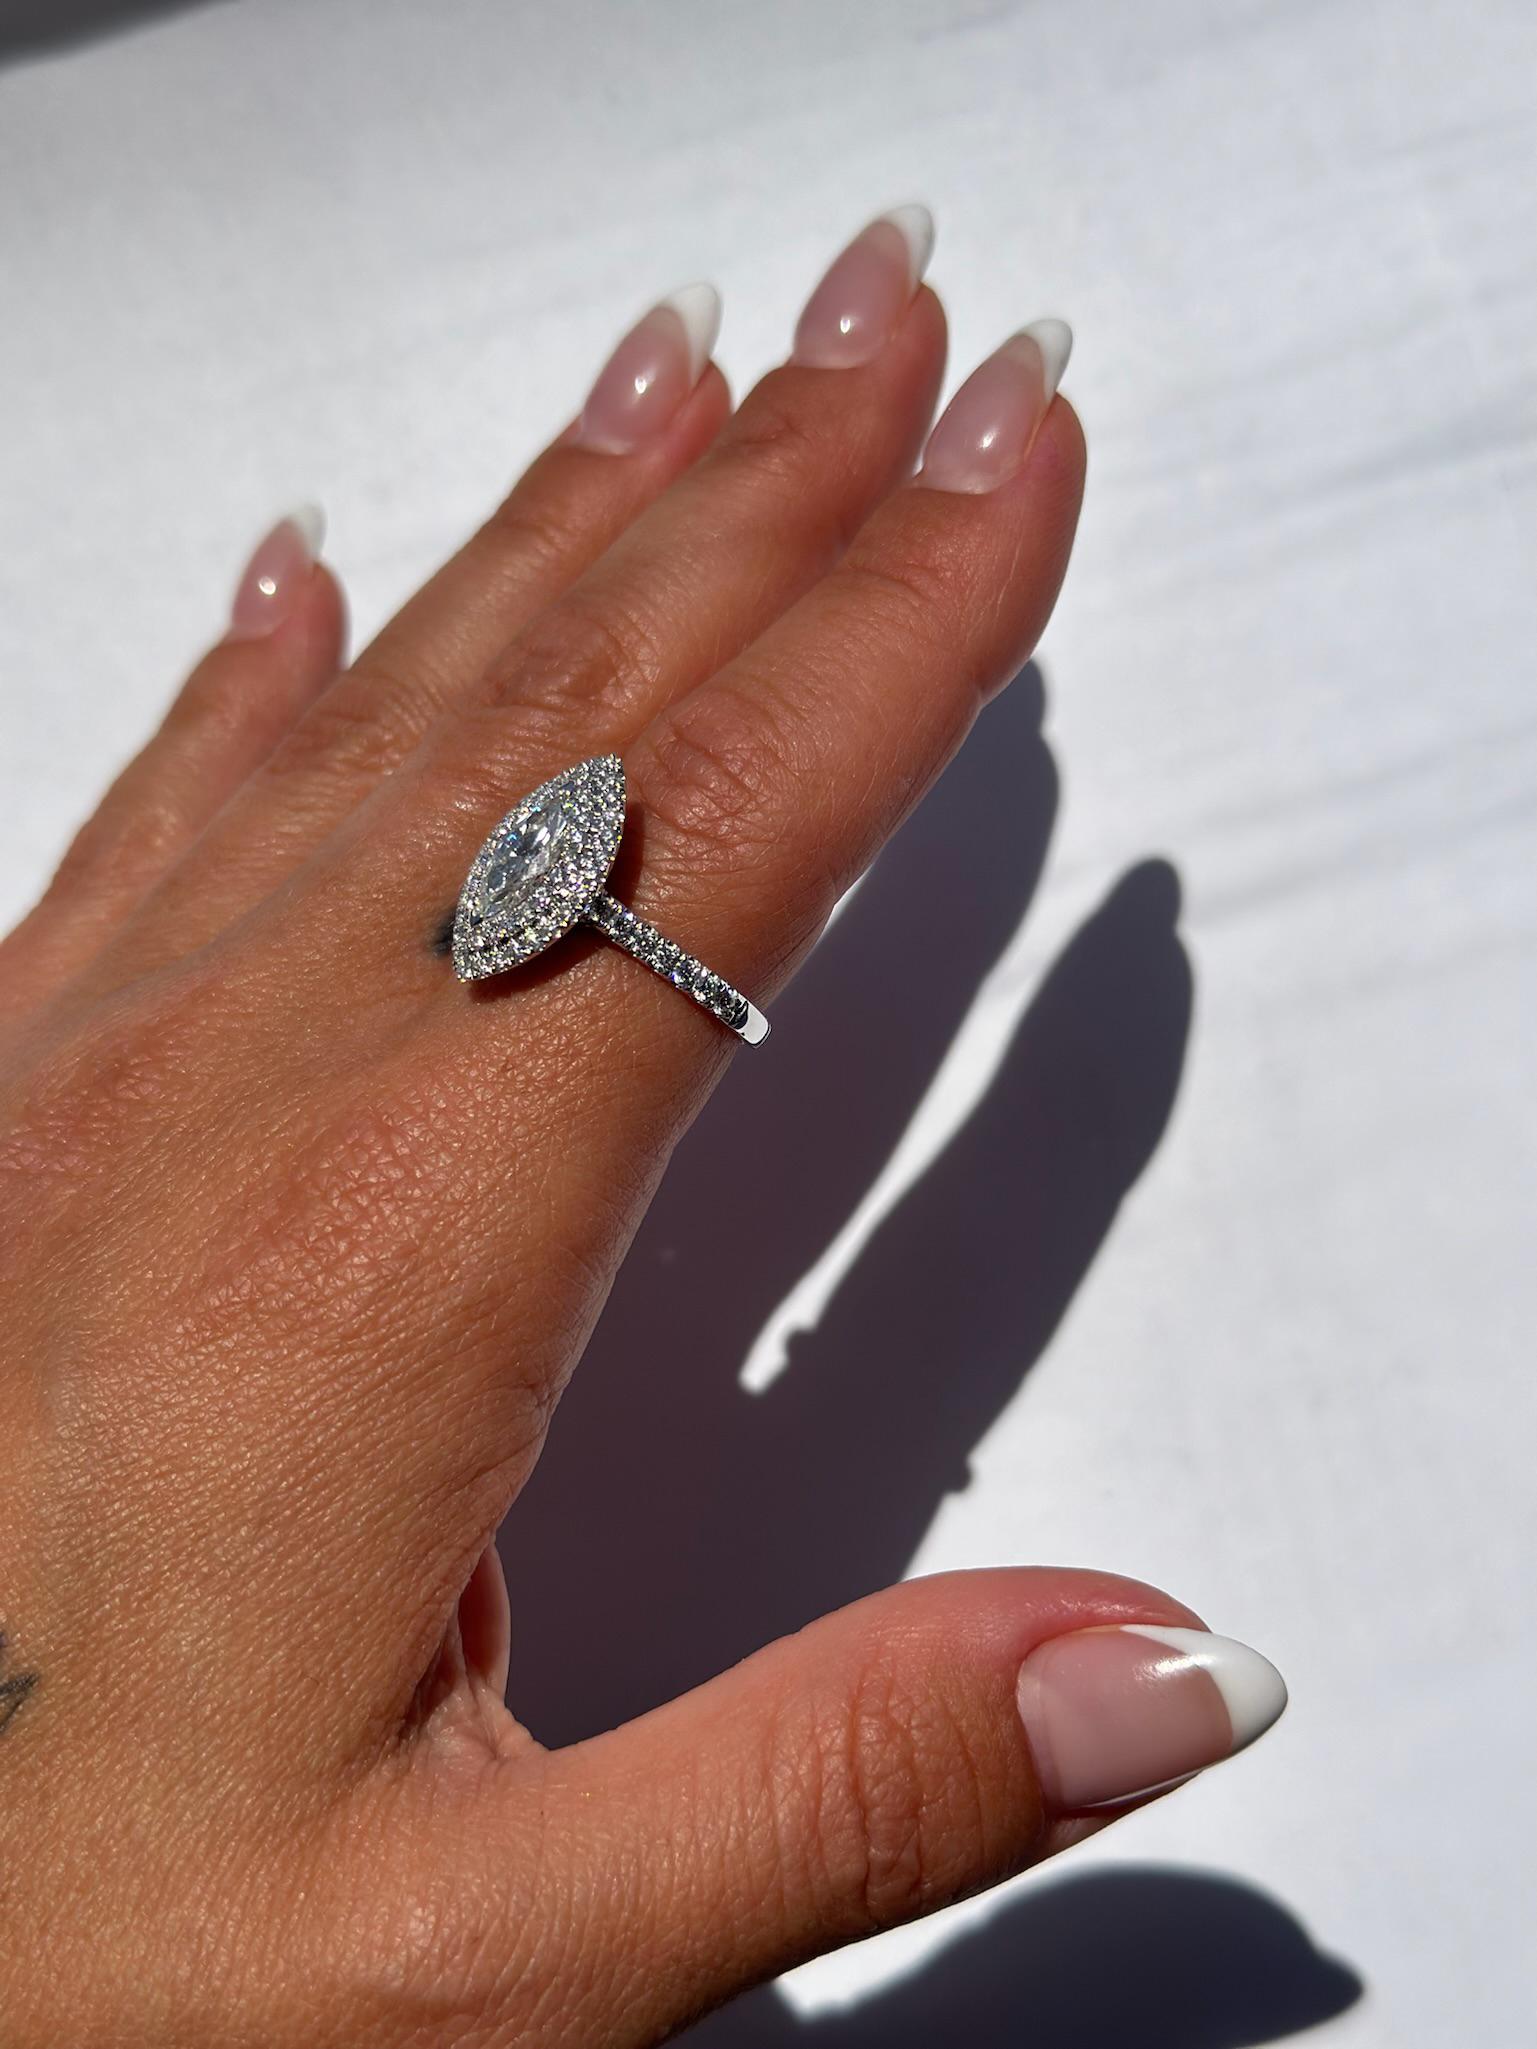 Introducing our exquisite 1.01ct Marquis-Cut Double Halo Diamond Ring, a breathtaking masterpiece that radiates elegance and captures the essence of timeless beauty. 

The centerpiece of this remarkable ring is a brilliant 1.01ct marquis-cut